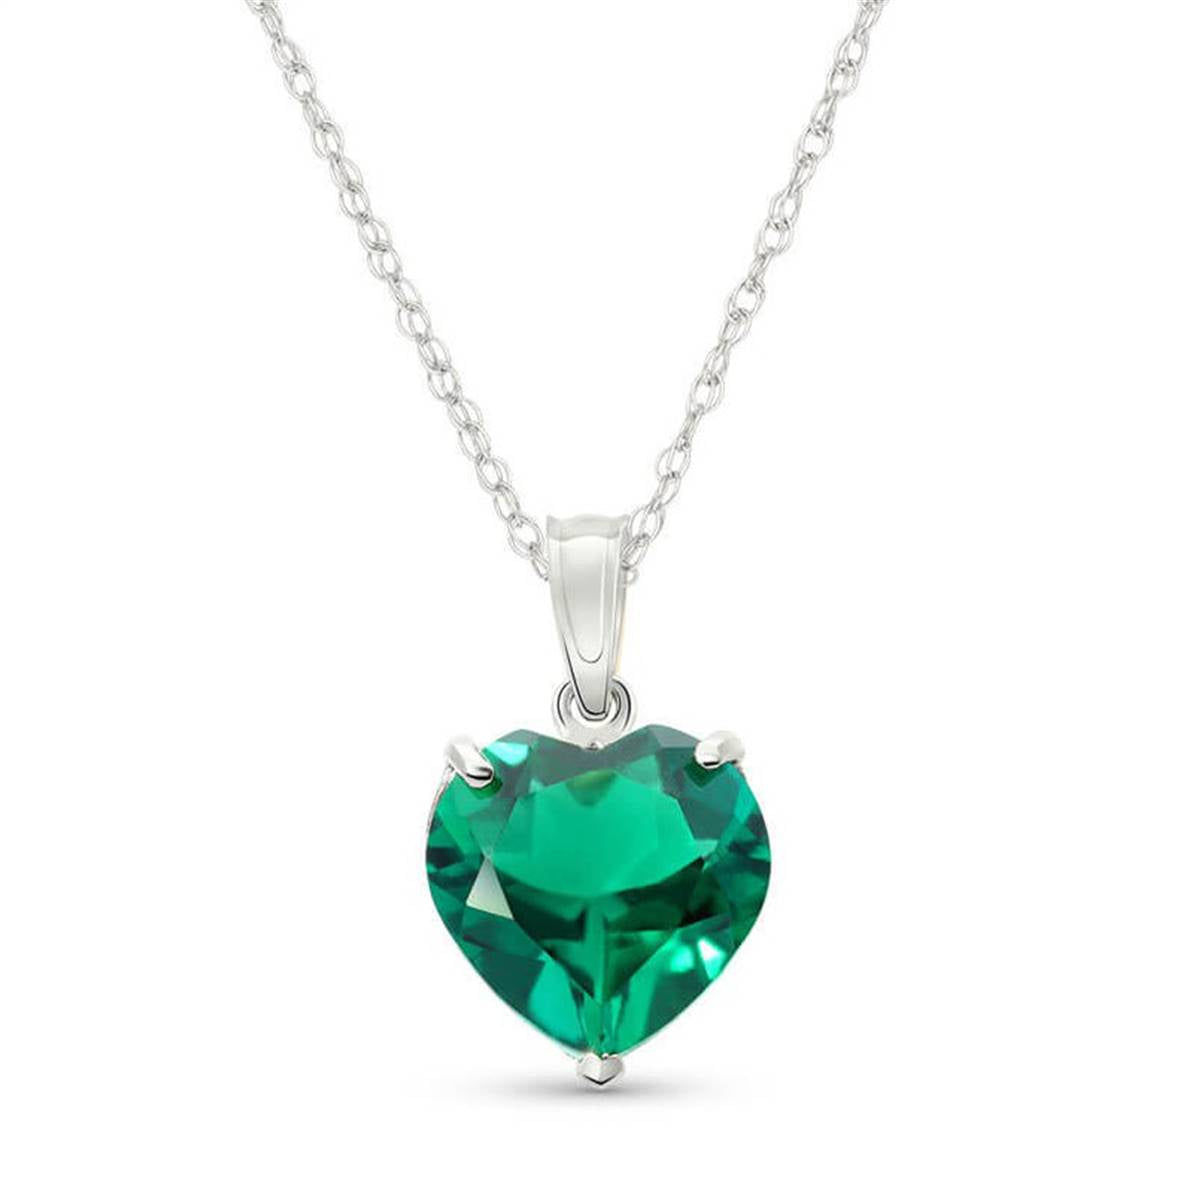 14K Solid White Gold Necklace With Heart Shape 2.75 ctw High Polished Genuine Emerald - Grade AAA